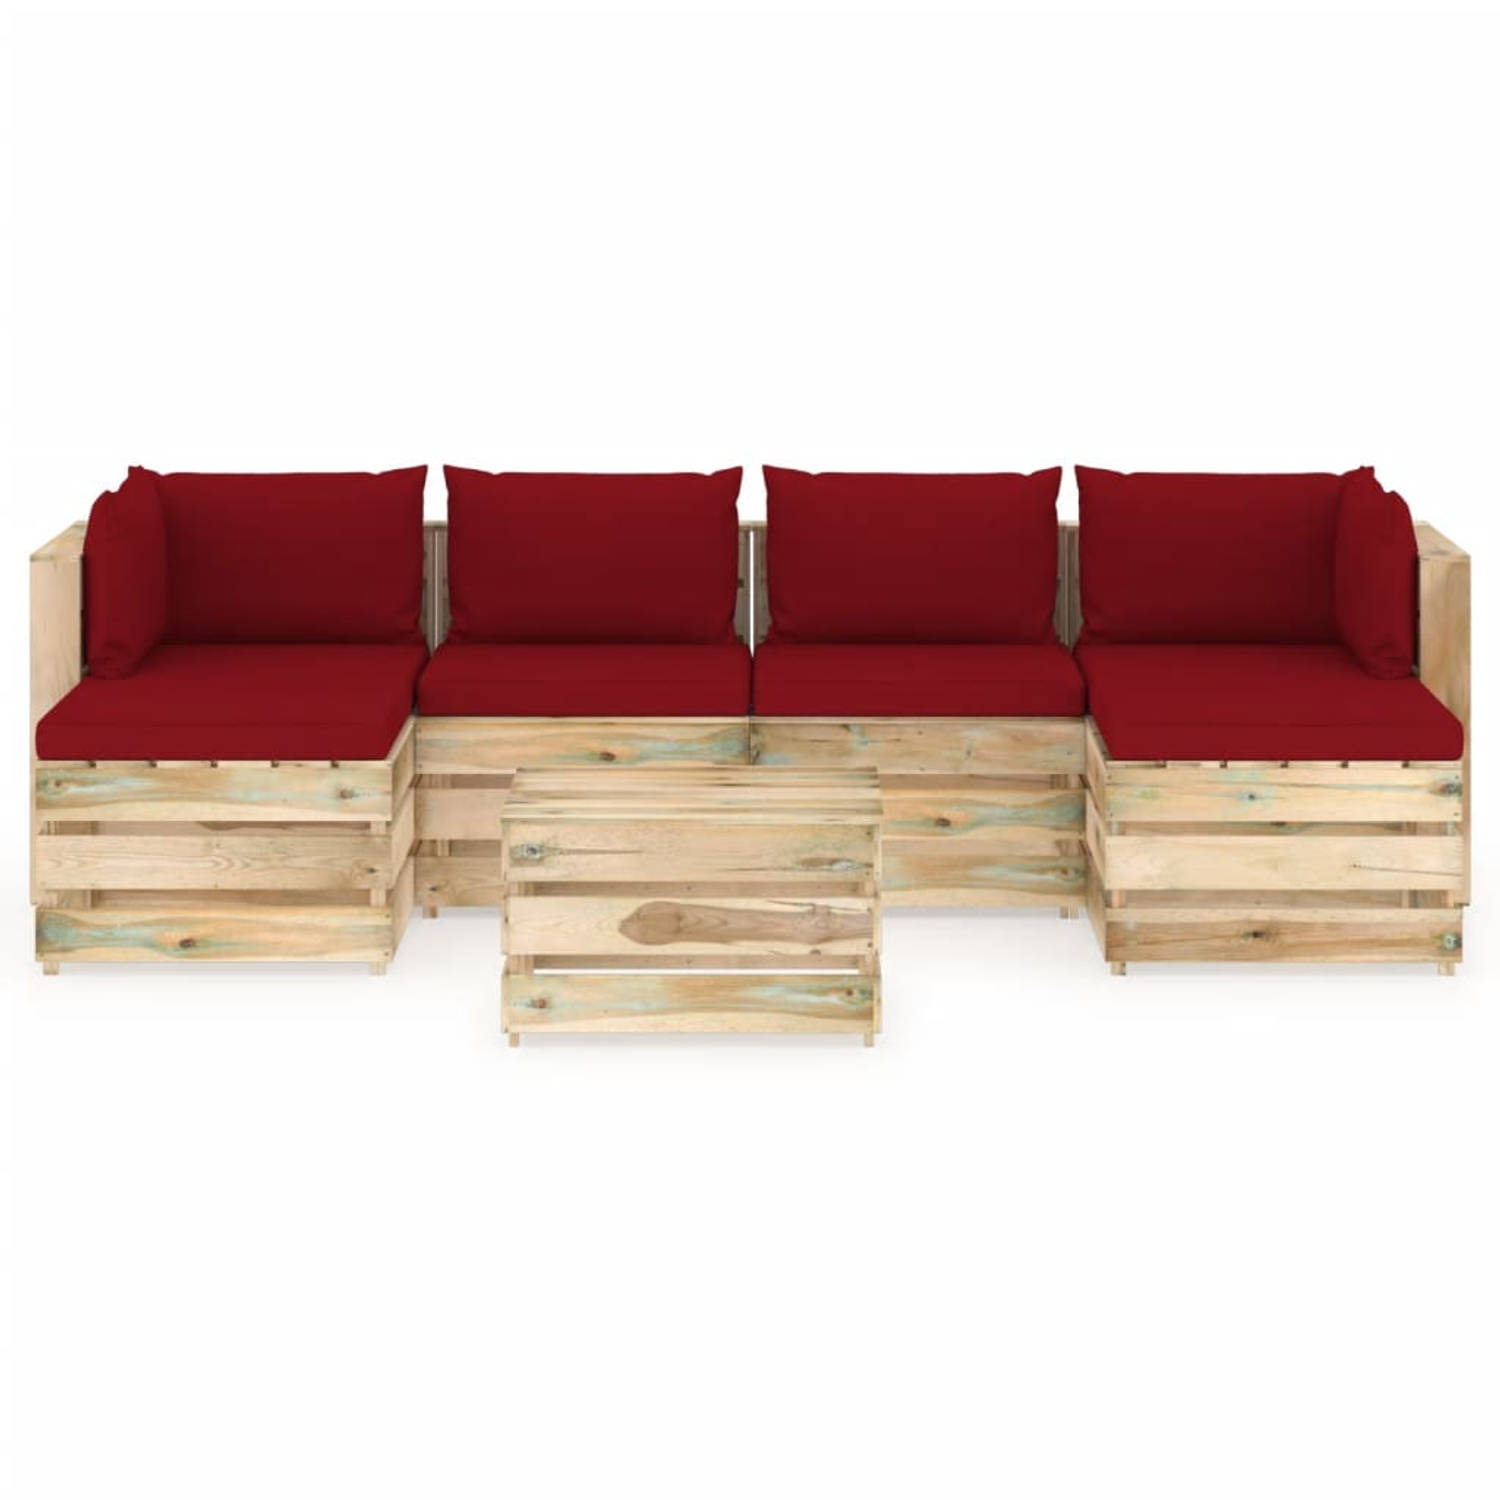 The Living Store Pallet Lounge Set - Grenenhout - Modulair Design - 69 x 70 x 66 cm - Wijnrode Kussens